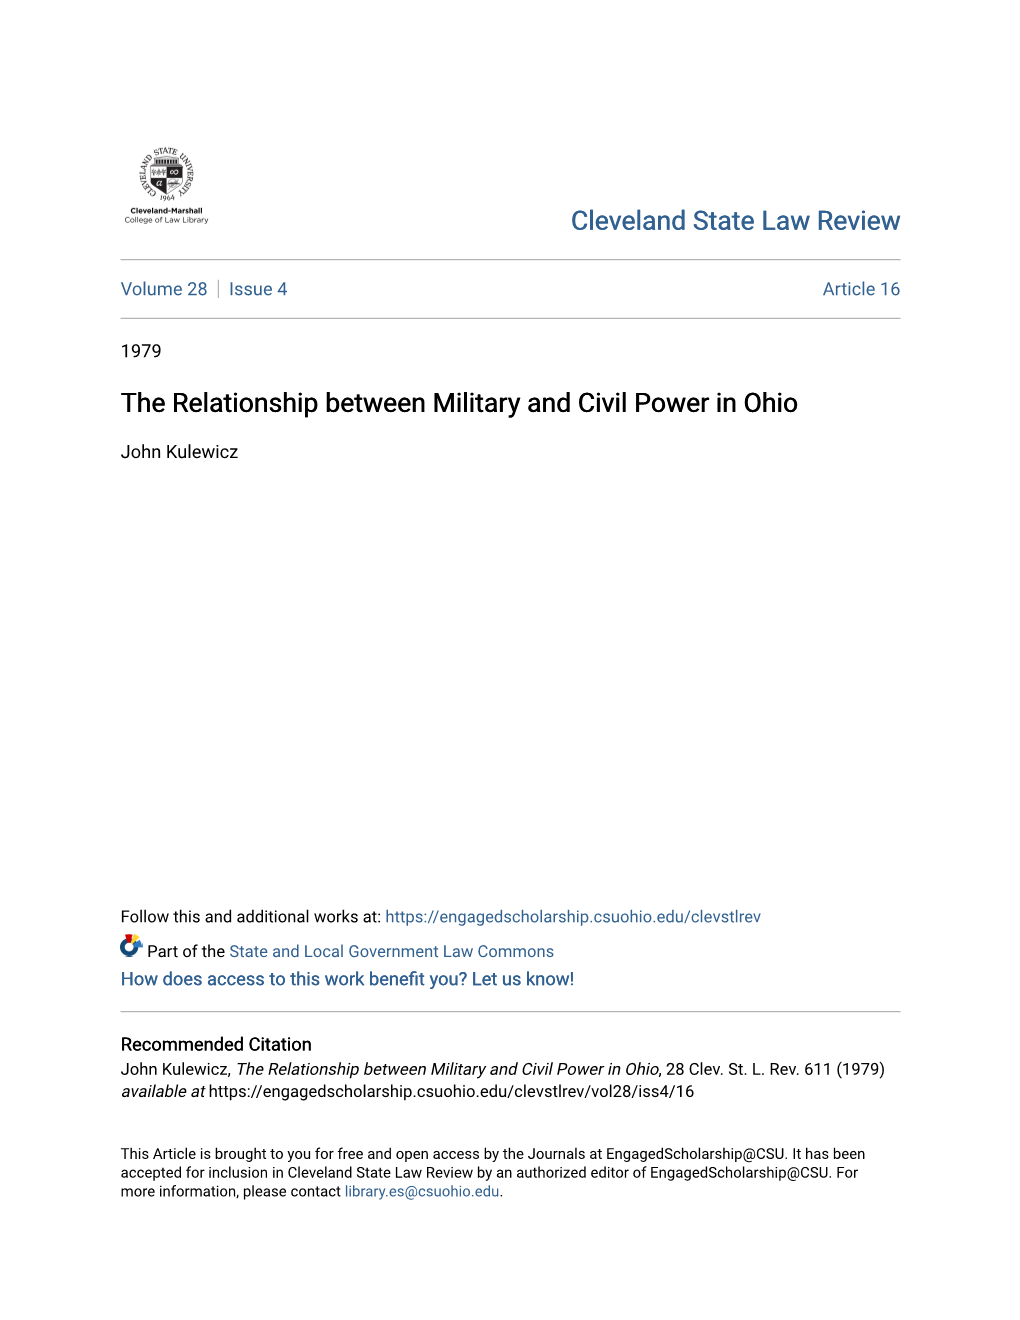 The Relationship Between Military and Civil Power in Ohio